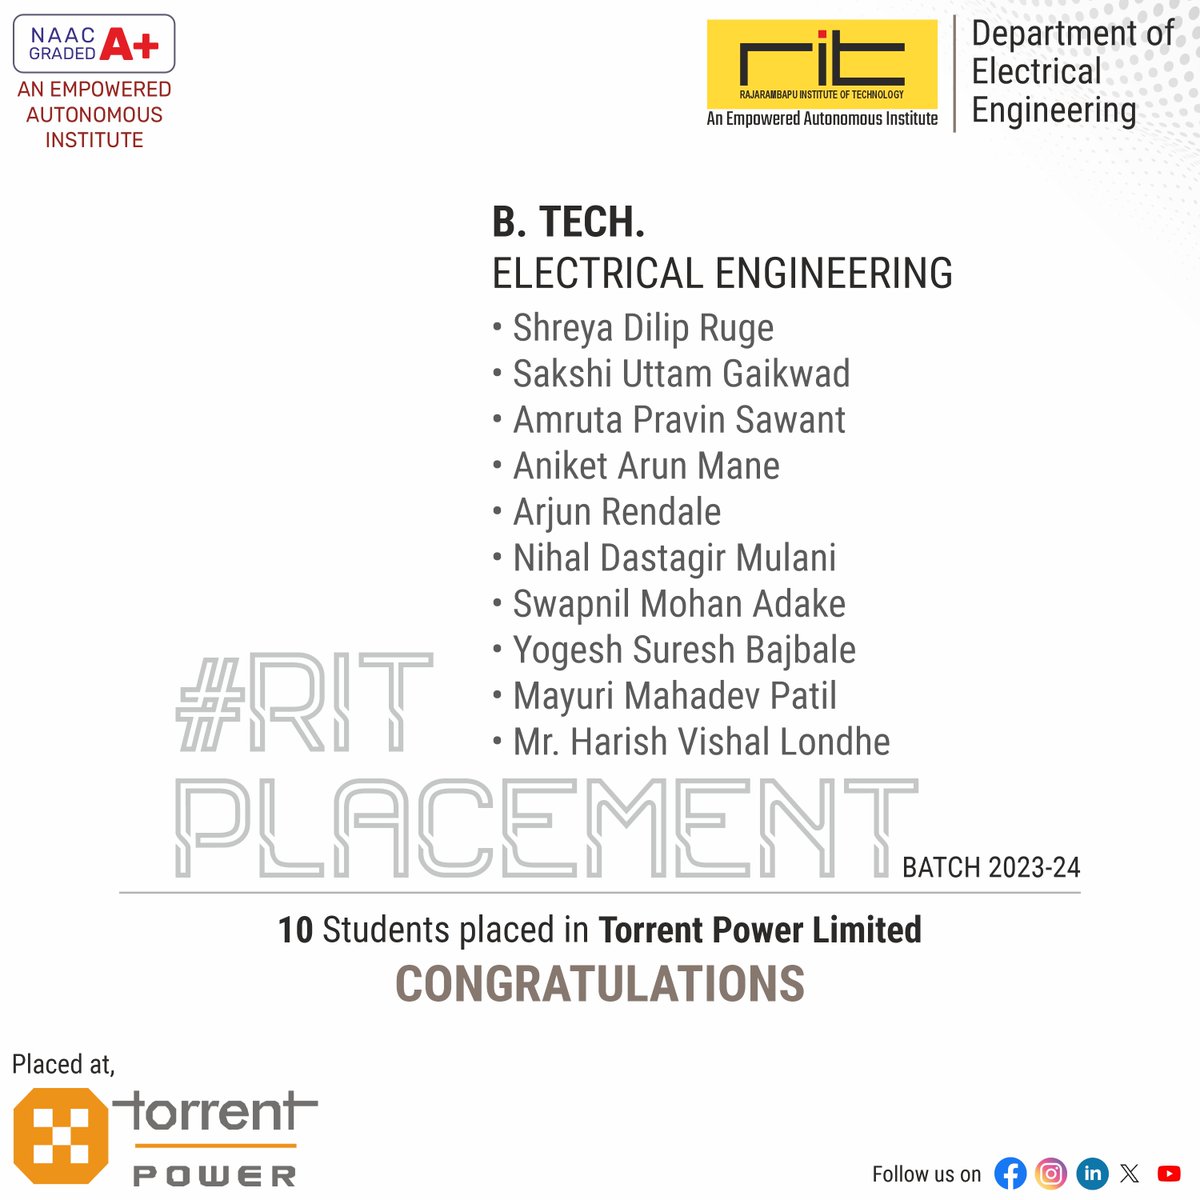 Congratulations...!
10 students from Final Year B. Tech Electrical Engineering (Batch 2023-24)  got placed at Torrent Power Limited.

#PlacementOpportunities #CareerPlacement #JobPlacement #PlacementAssistance #GetPlaced #PlacementServices #PlacementSuccess